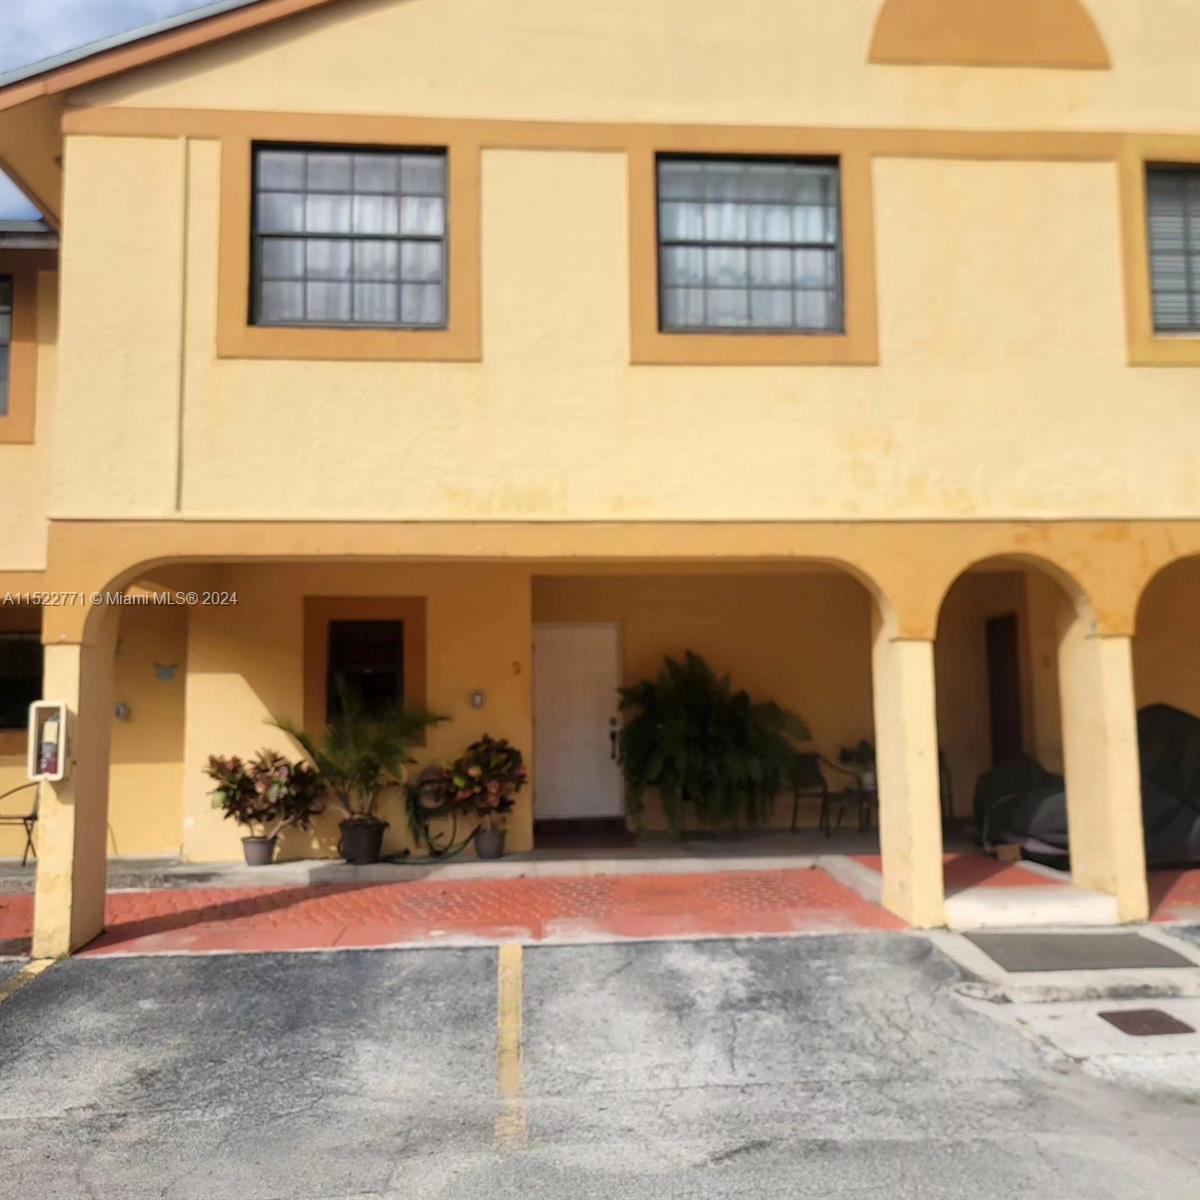 11821 SW 18th St 2-23, Miami, Florida 33175, 3 Bedrooms Bedrooms, ,2 BathroomsBathrooms,Residential,For Sale,11821 SW 18th St 2-23,A11522771